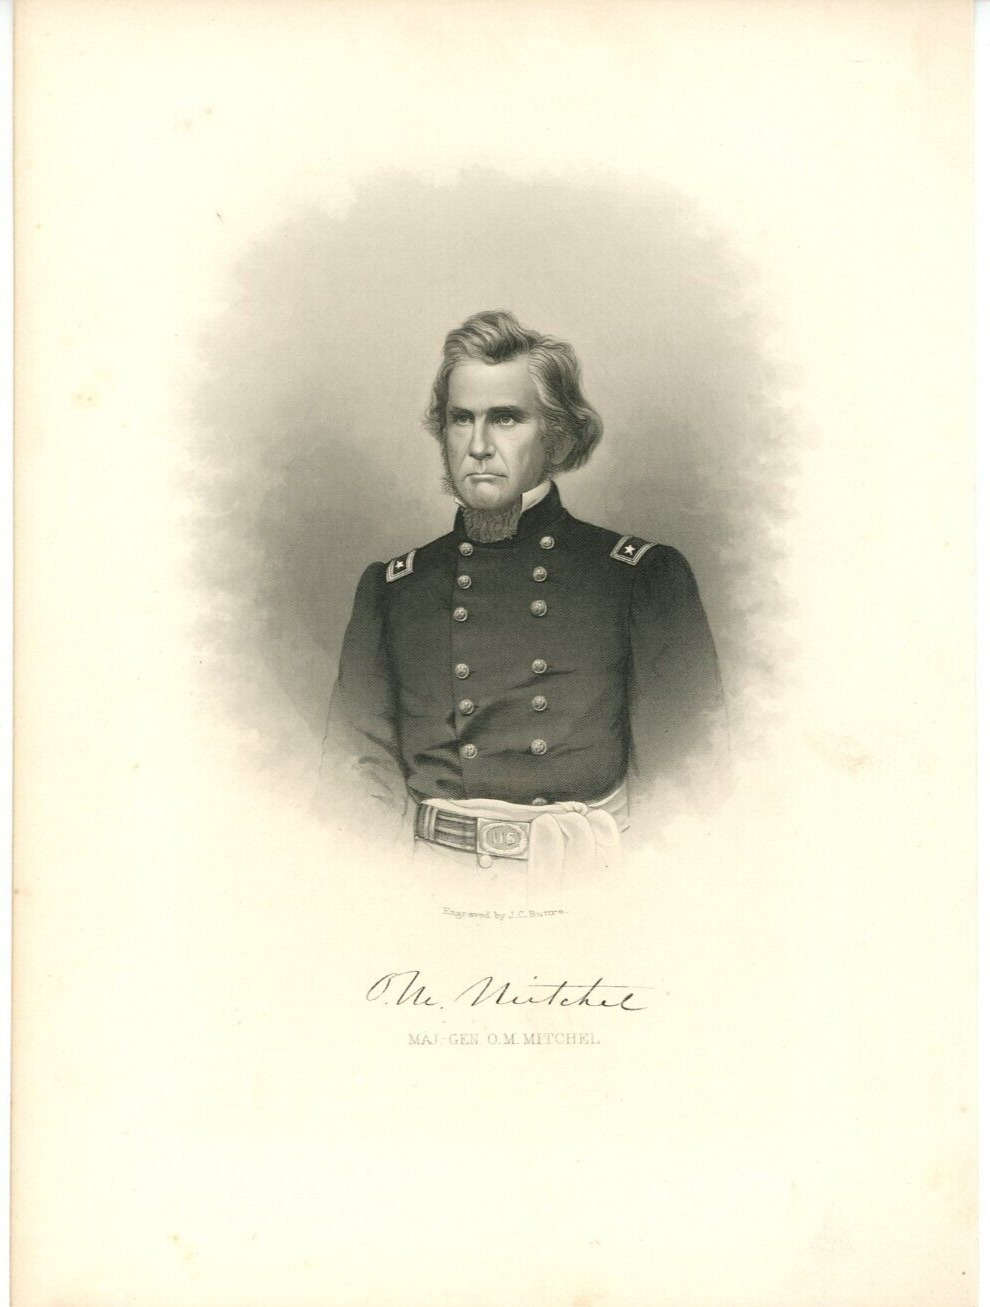 7x10 Original Engraving Union General Ormsby M. Mitchel by J. C. Buttre